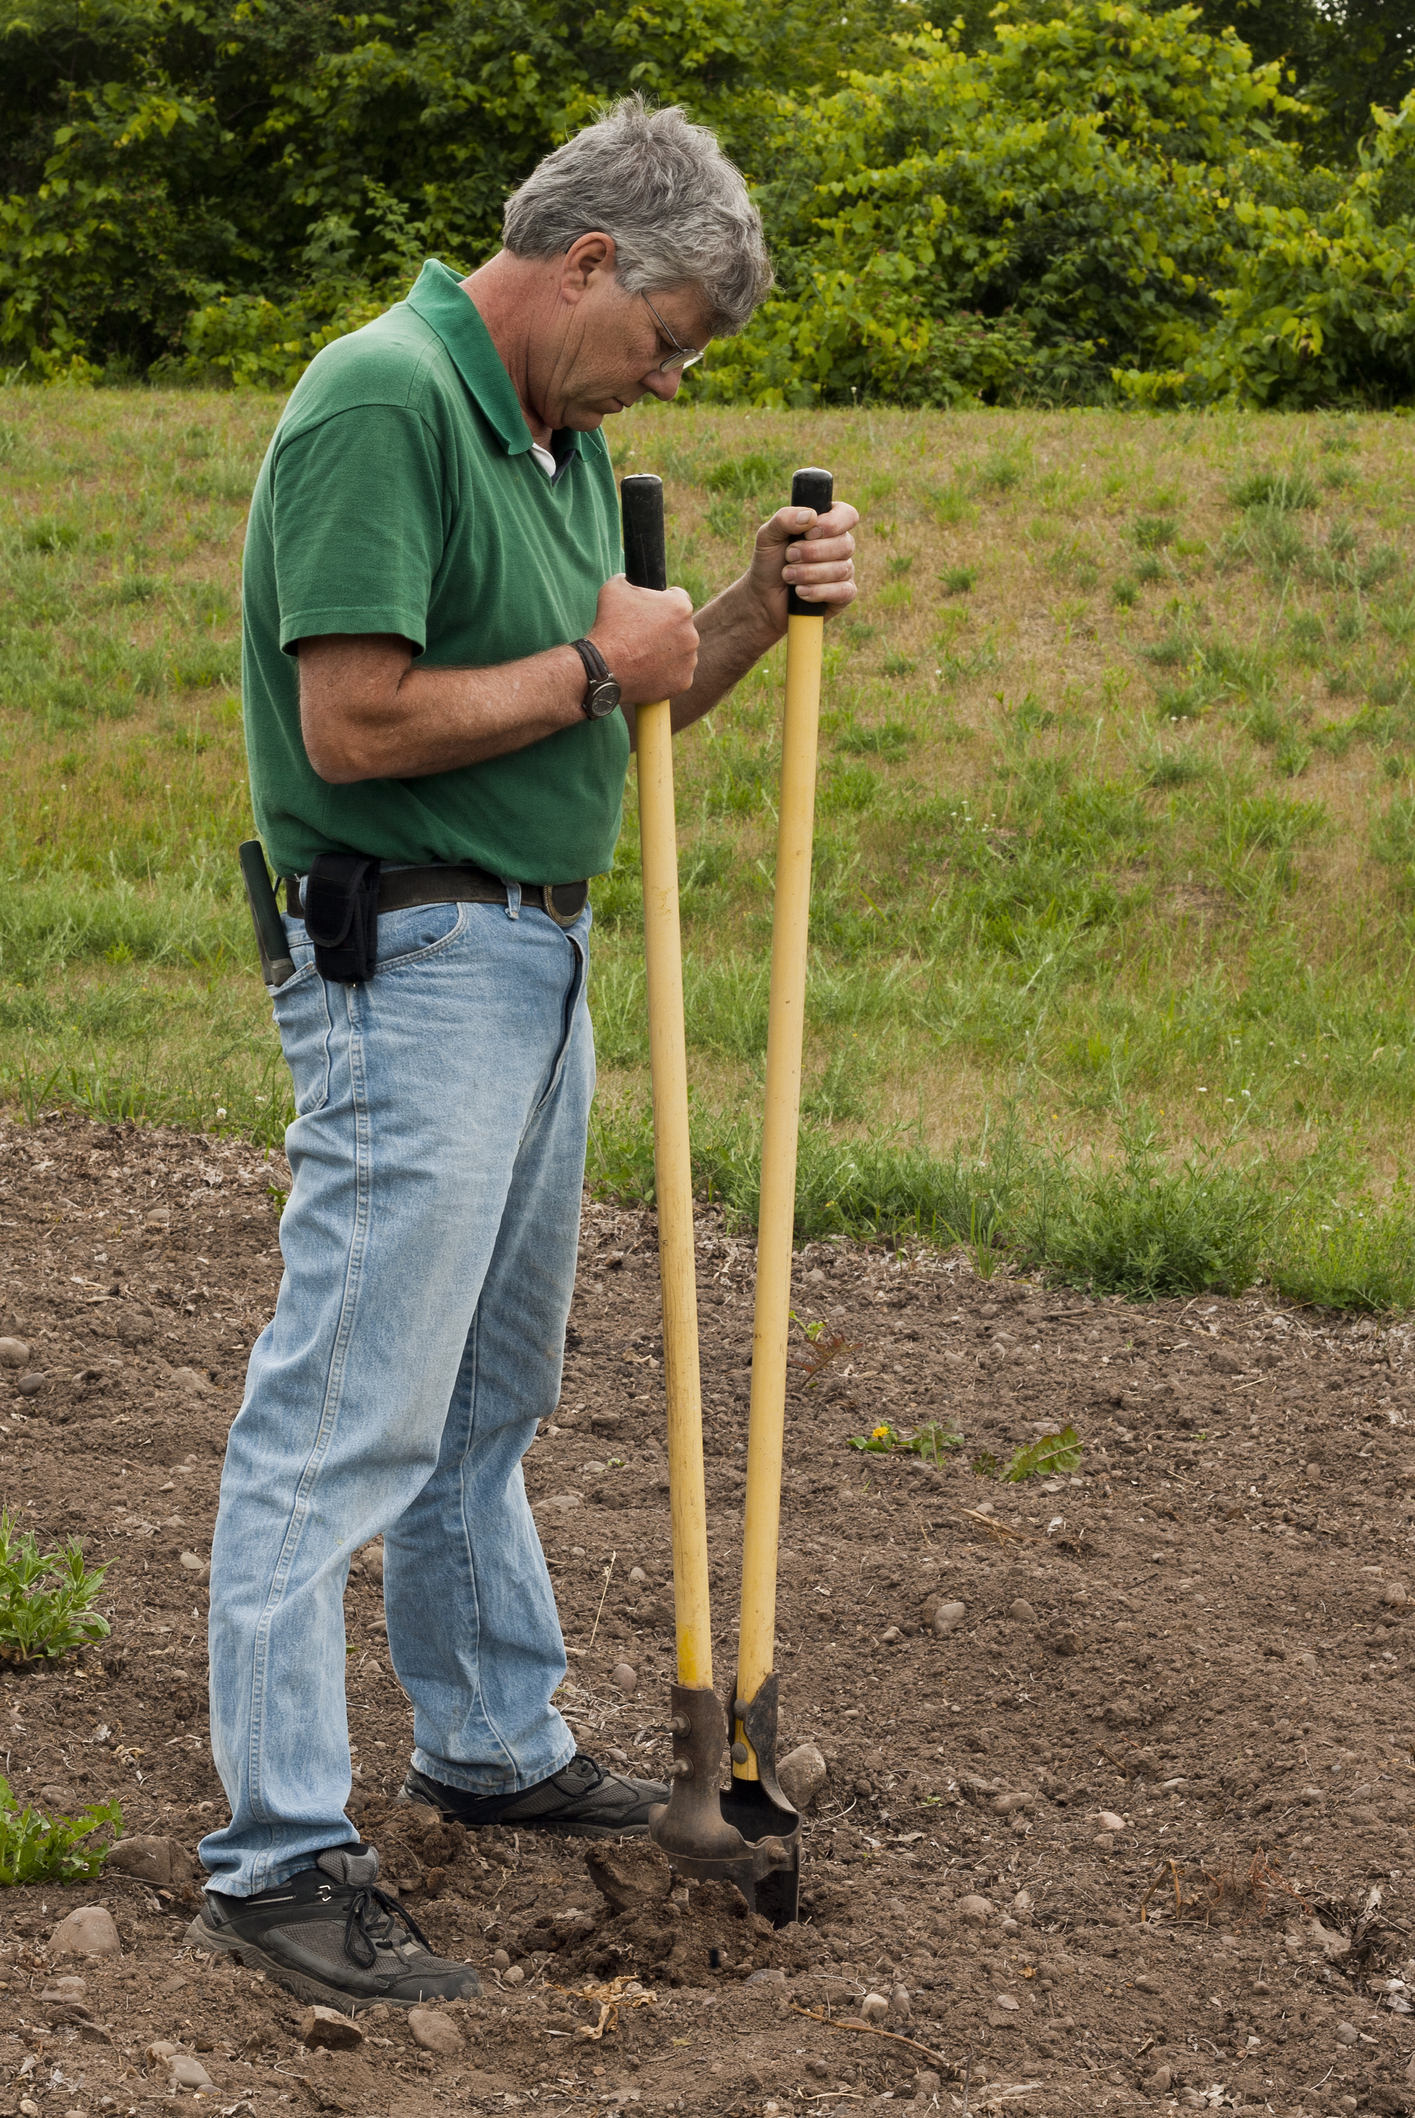 Man preparing to erect a fence by digging a post hole